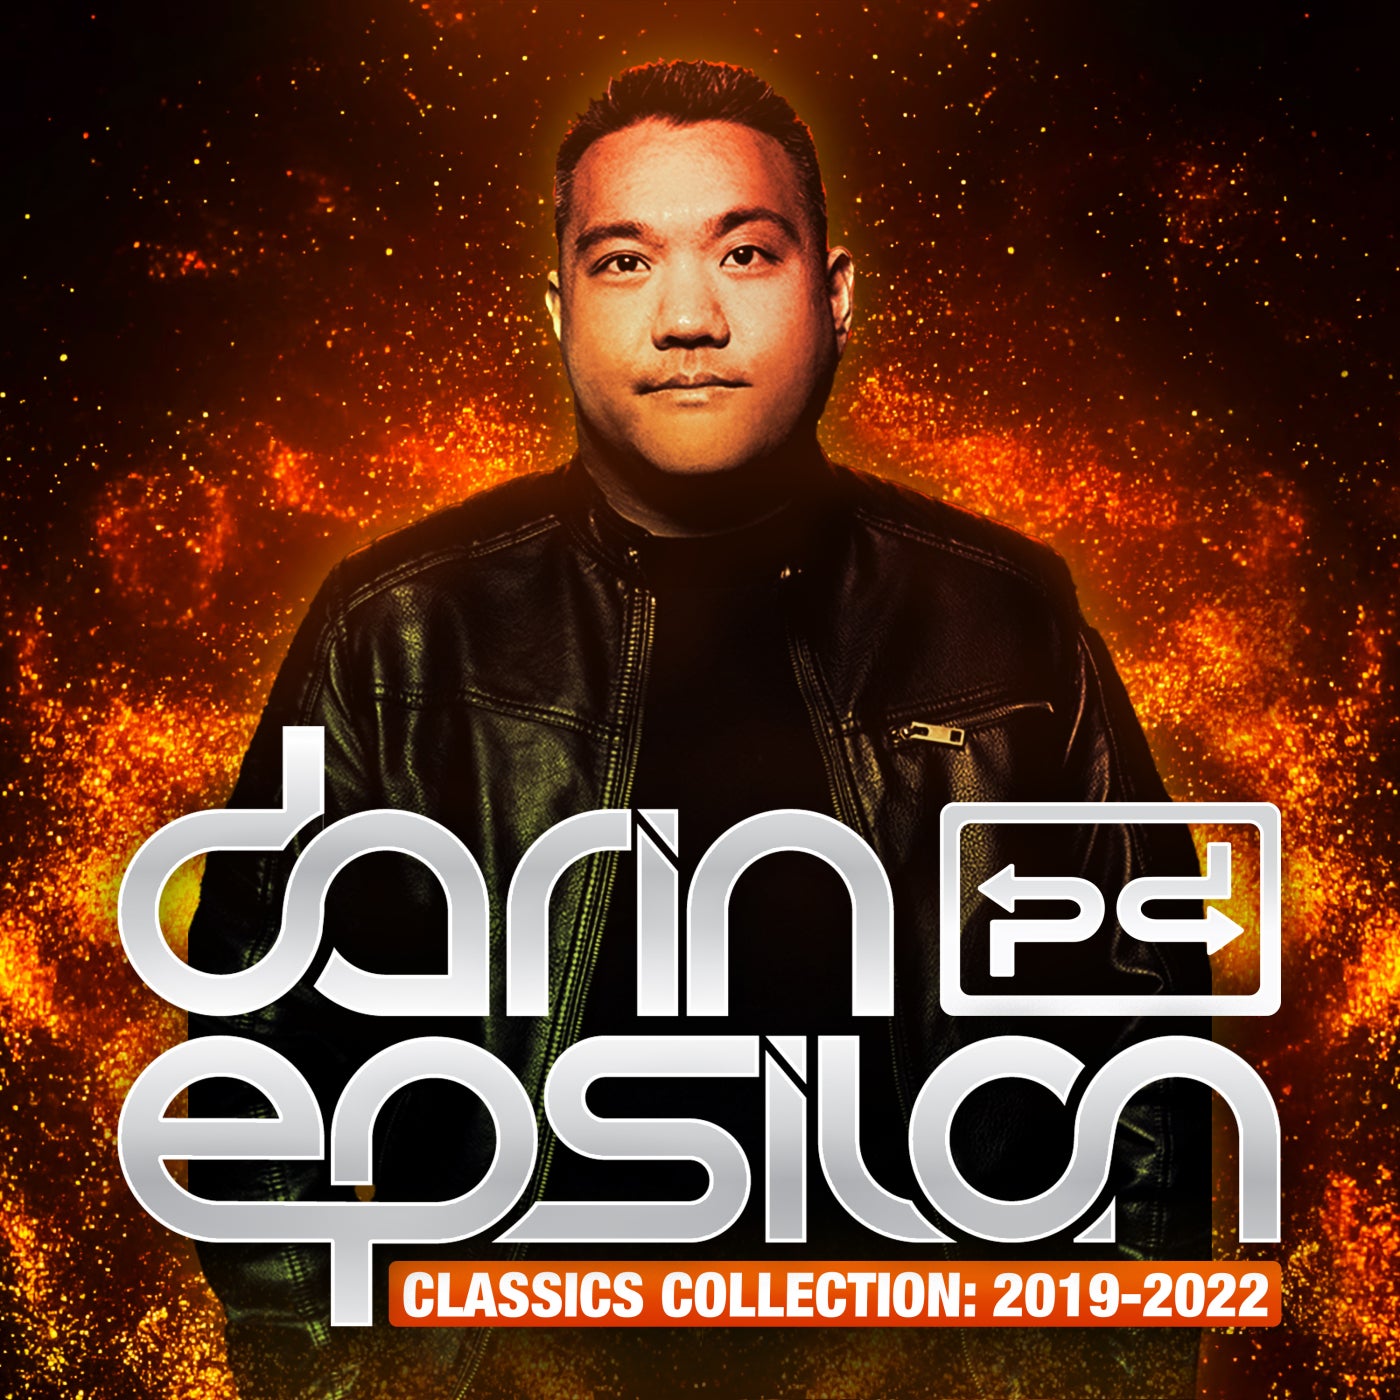 Classics Collection: 2019-2022